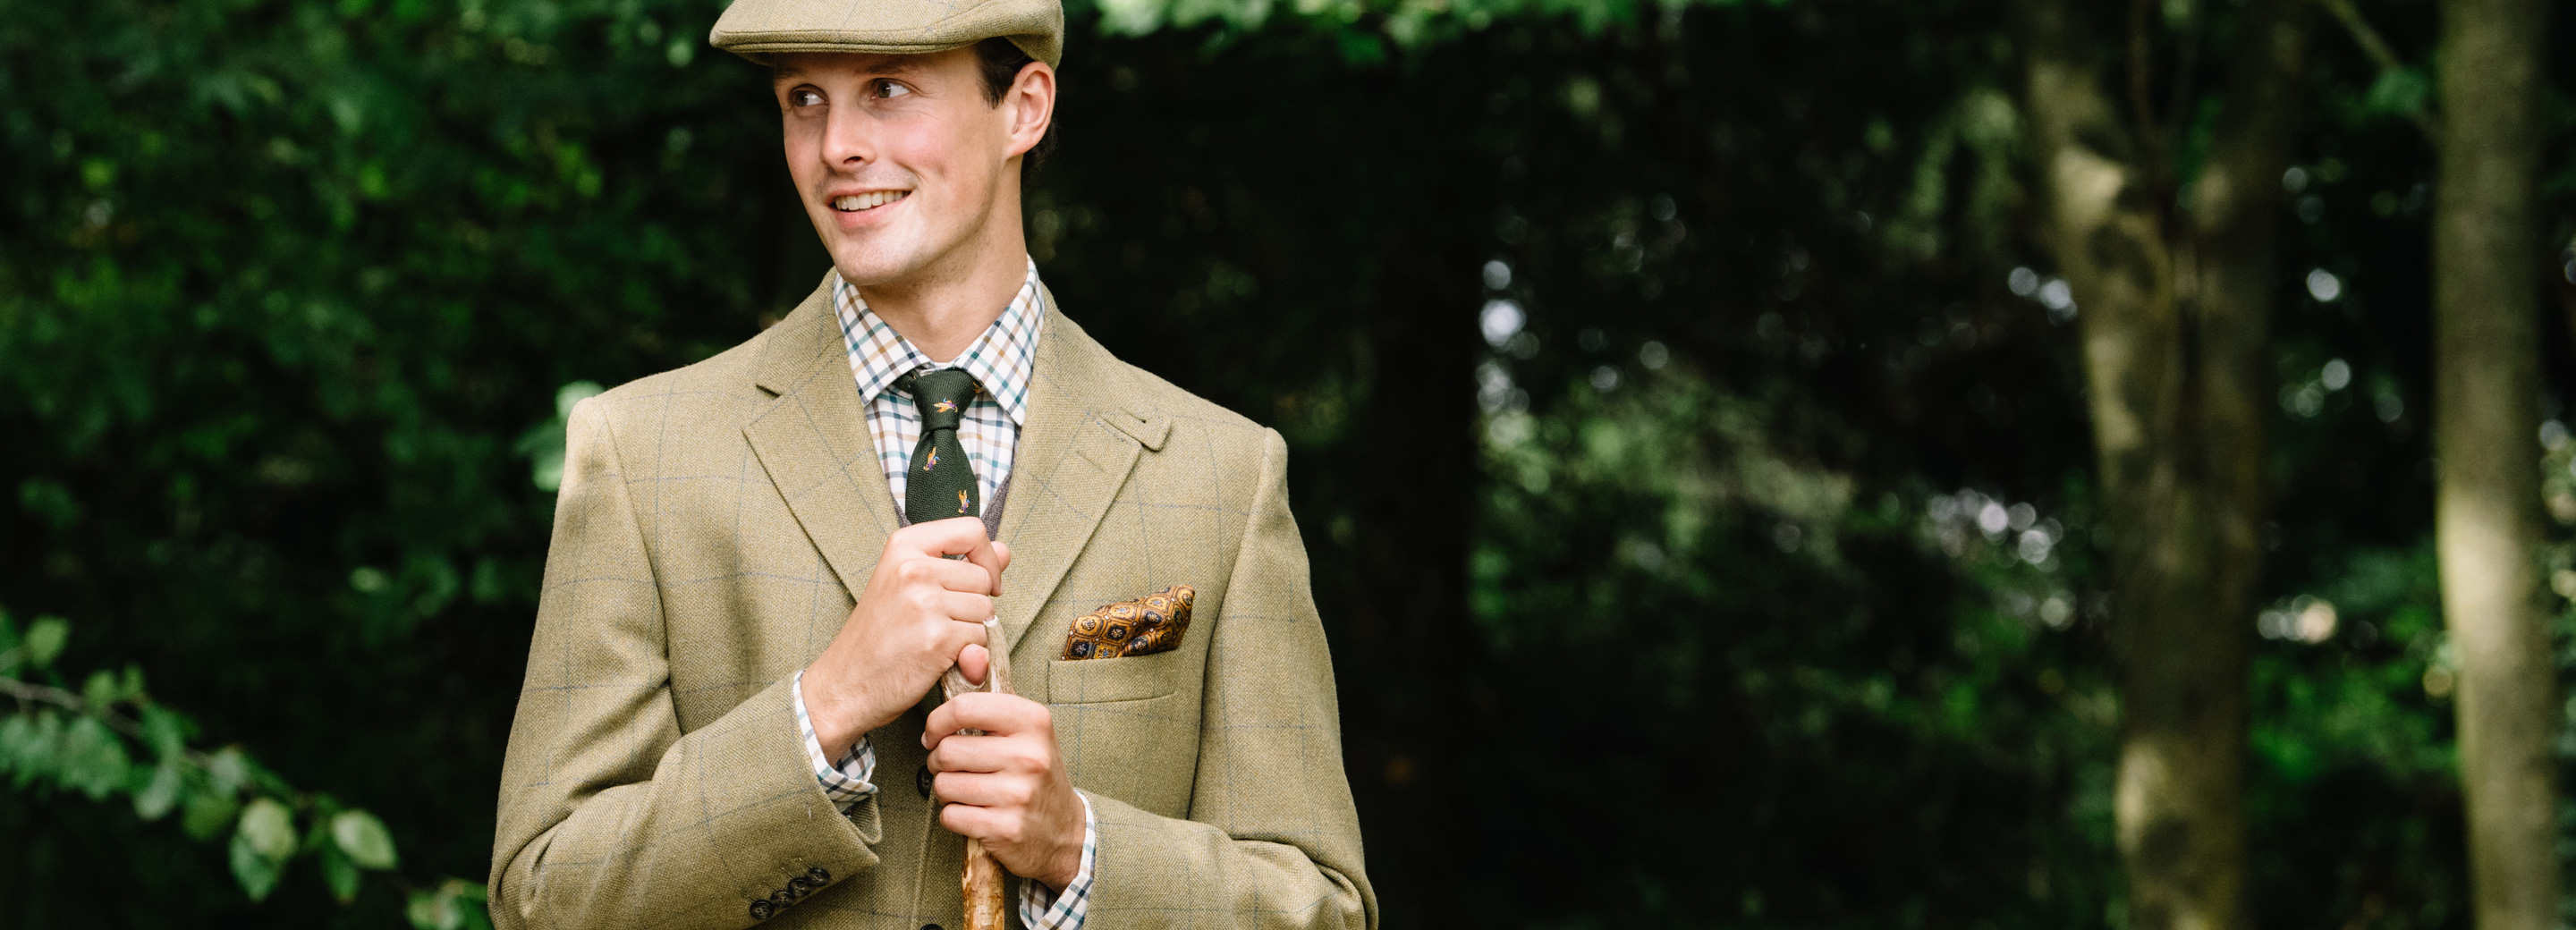 Men's Outfit Ideas For Town and Country